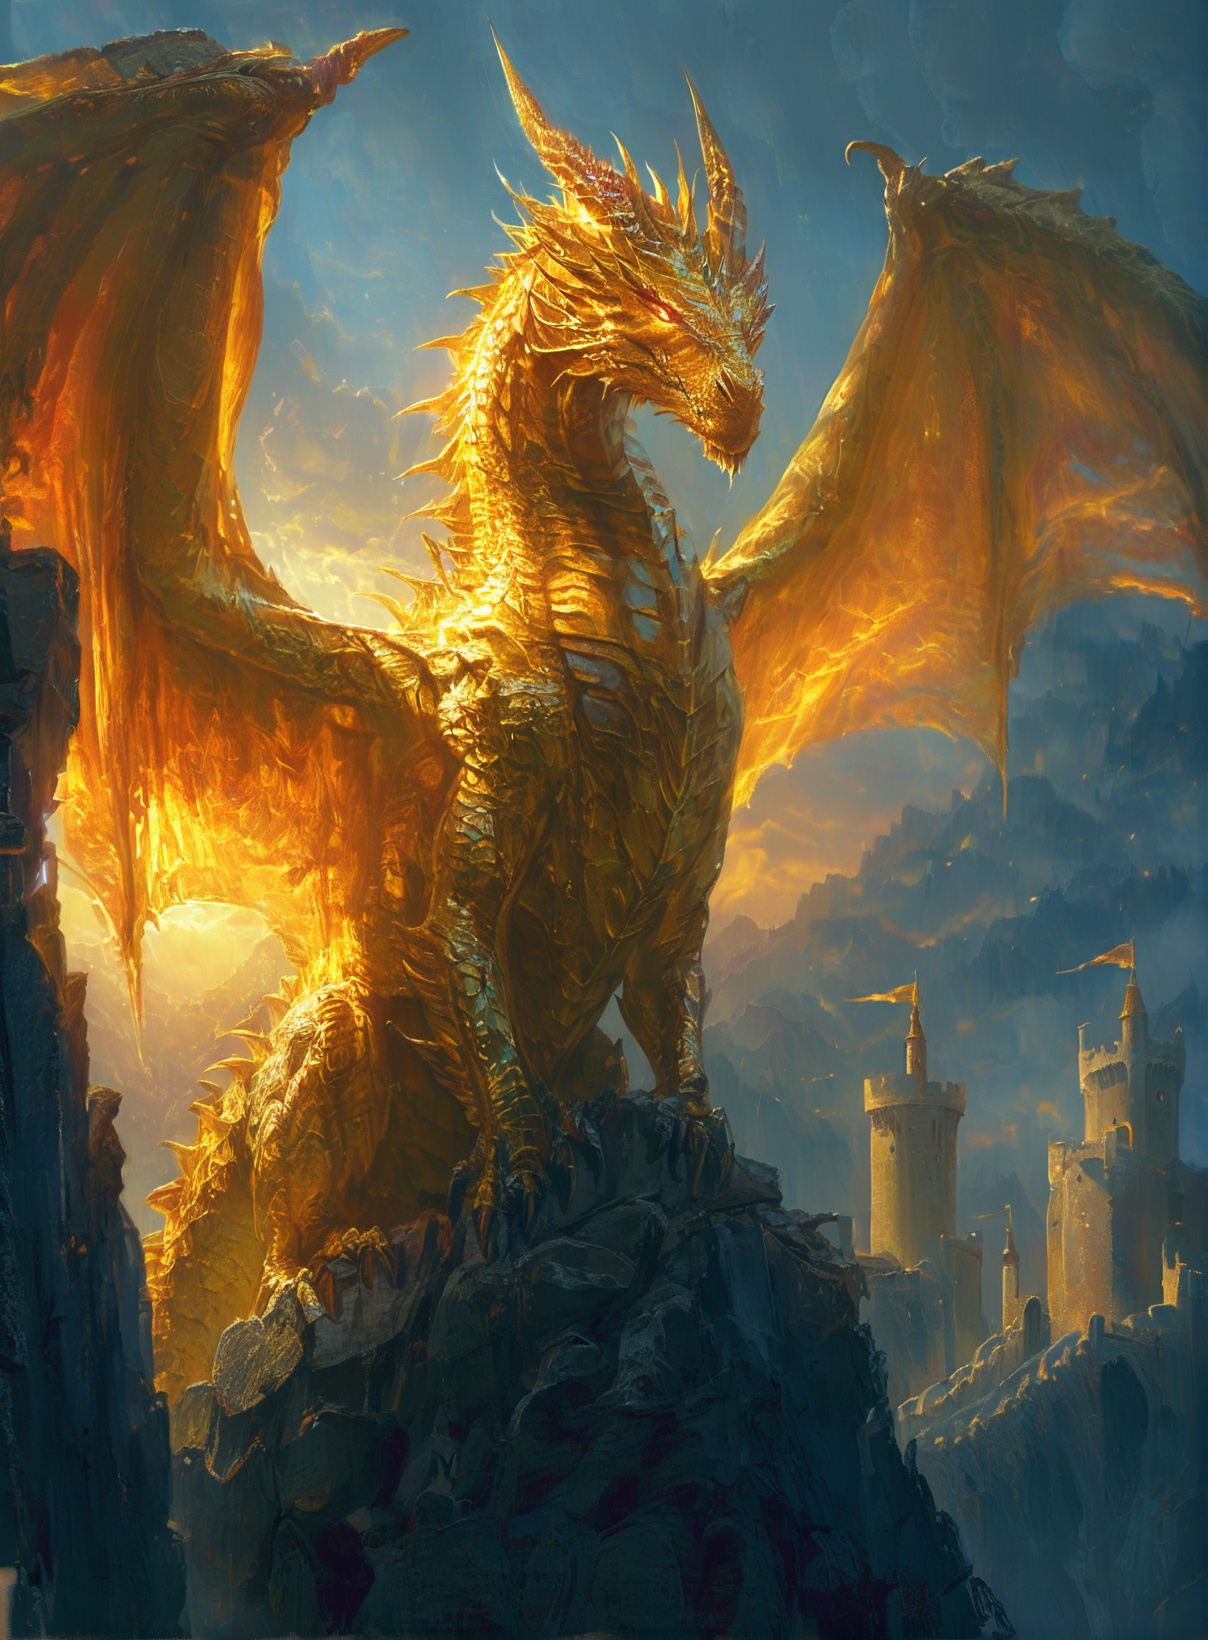 a majestic golden dragon perched atop a rocky cliff. The dragon's wings are spread wide, displaying a fiery glow, and its scales shimmer with a golden hue. The dragon's eyes are sharp and focused, and it appears to be gazing into the distance. In the background, there's a castle or fortress, partially illuminated by the setting or rising sun. The sky is painted with hues of orange, blue, and purple, suggesting either dawn or dusk. The overall ambiance of the image is one of fantasy and grandeur<lora:KING Gardon-000010:1>